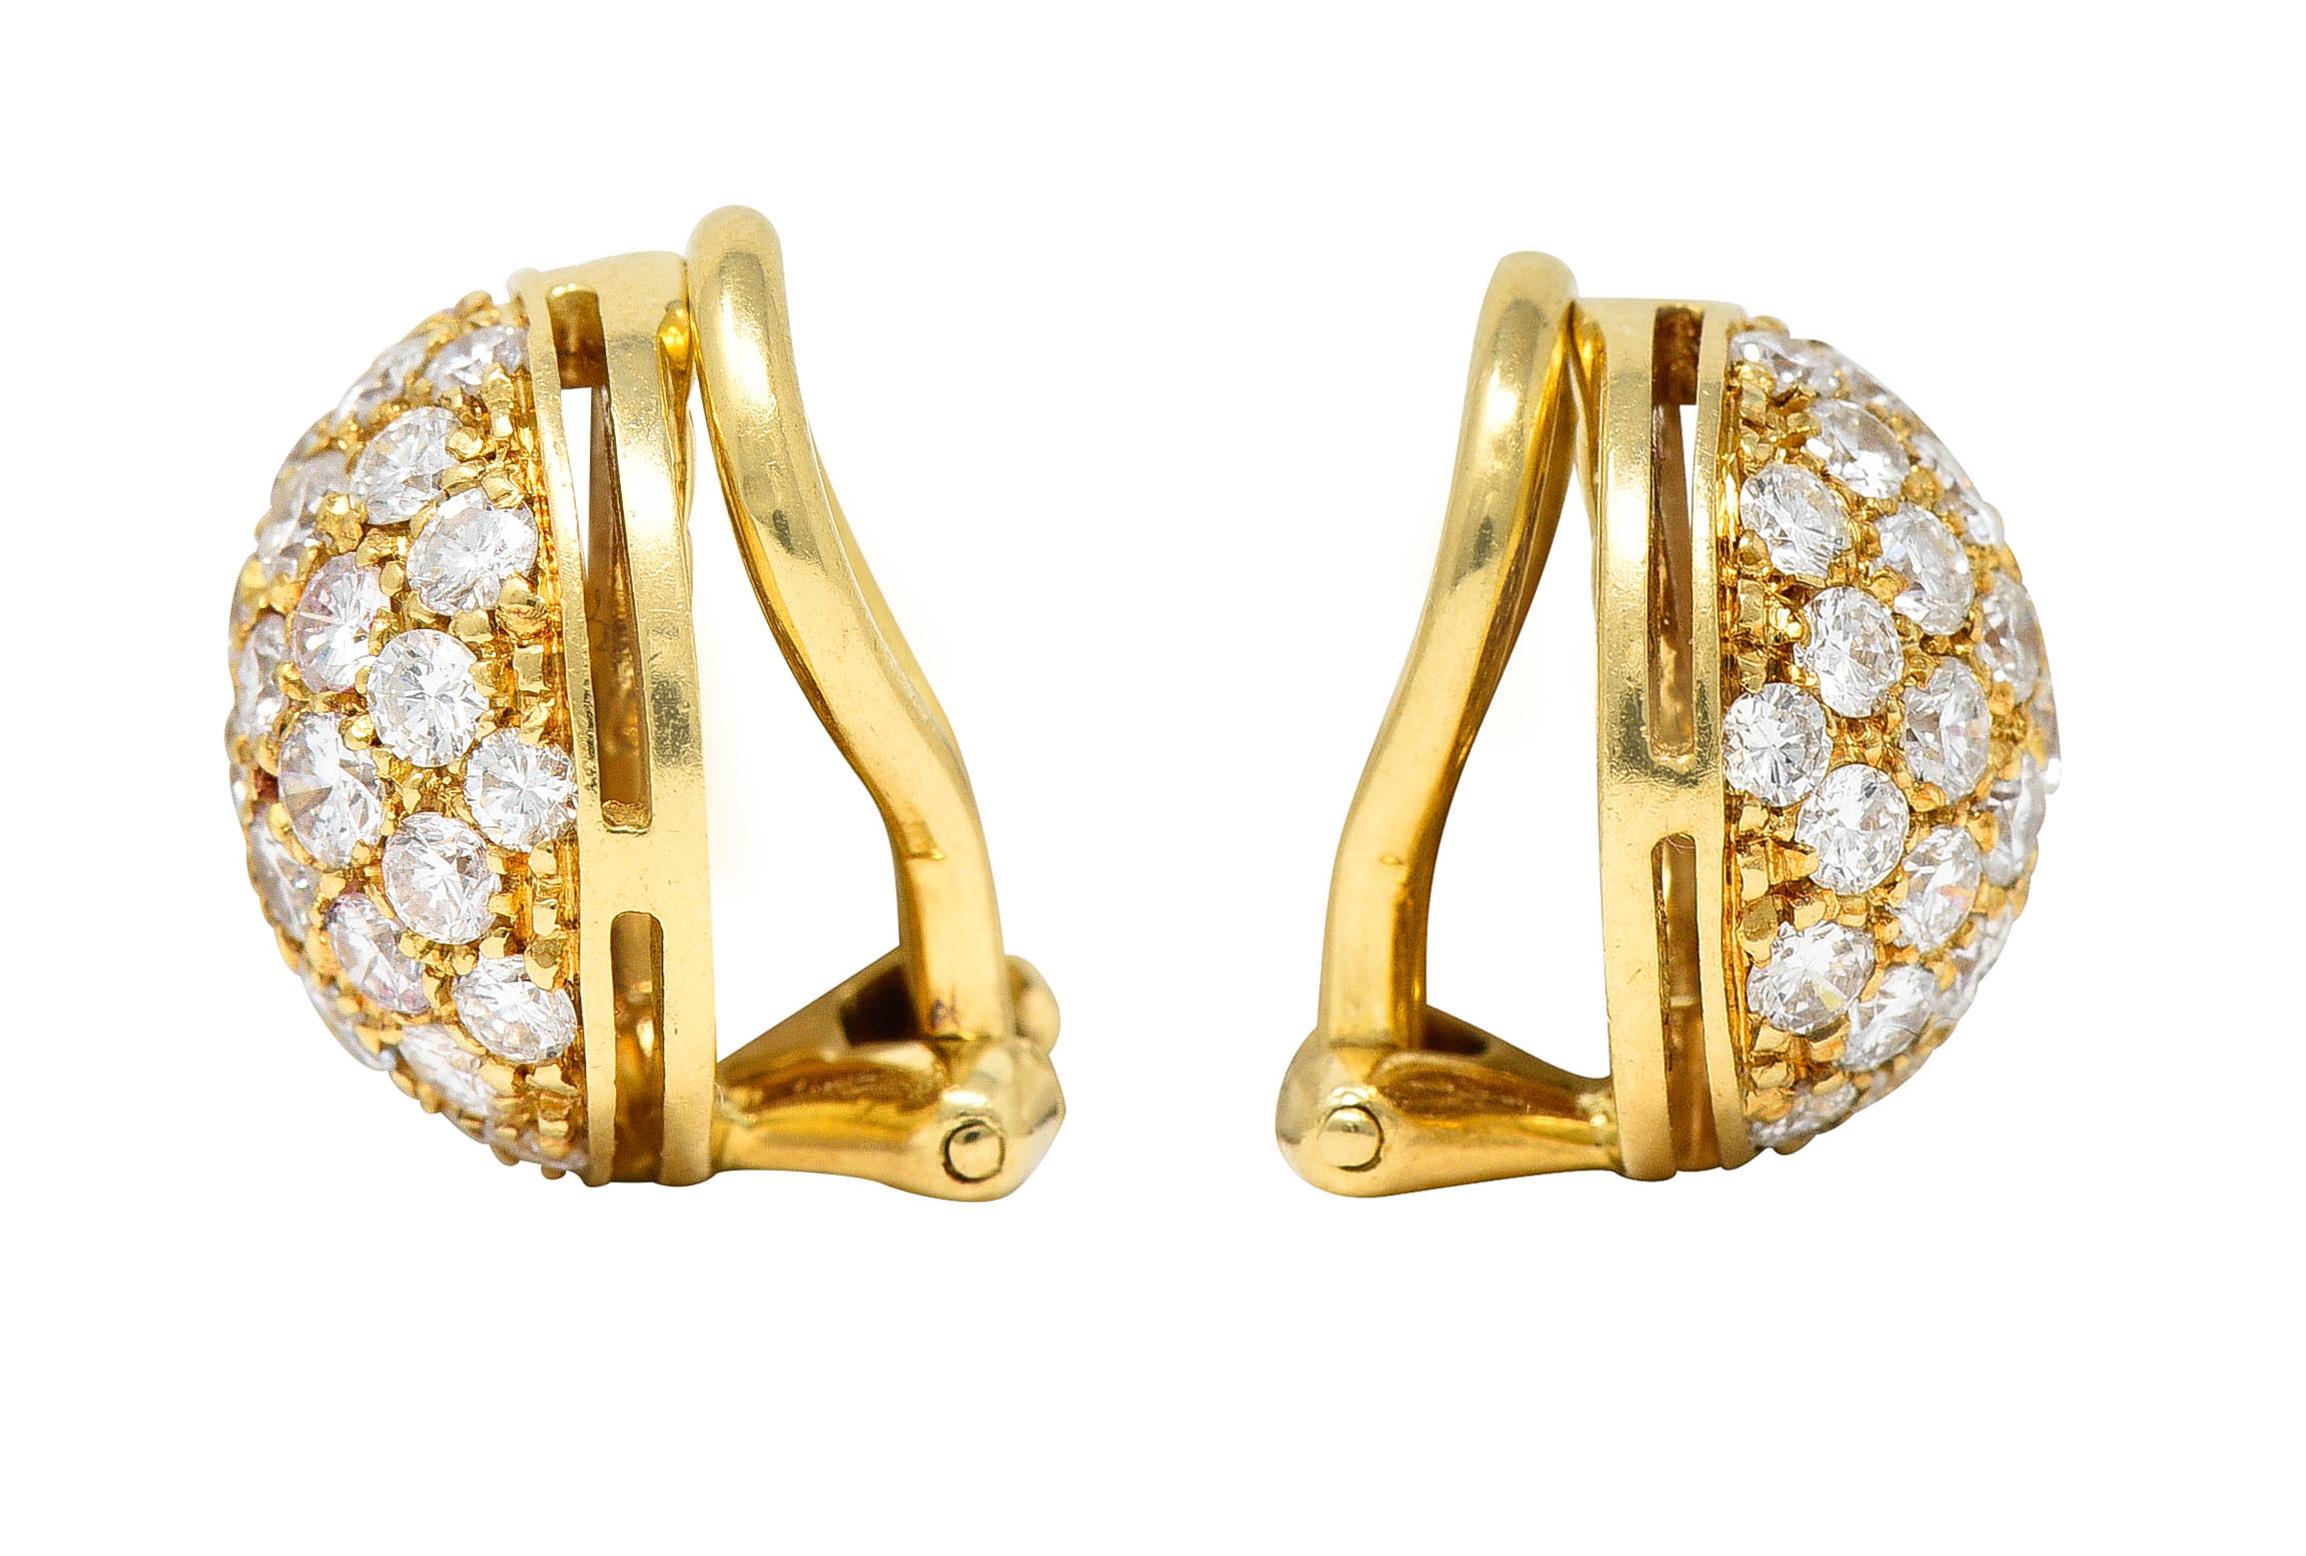 Ear-clips are 12.0 mm round dome forms

Pavè set throughout by round brilliant cut diamonds

Weighing in total approximately 1.10 carats with F/G and VS clarity

Completed by hinged omega backs

Stamped 750 for 18 karat gold

Numbered and fully